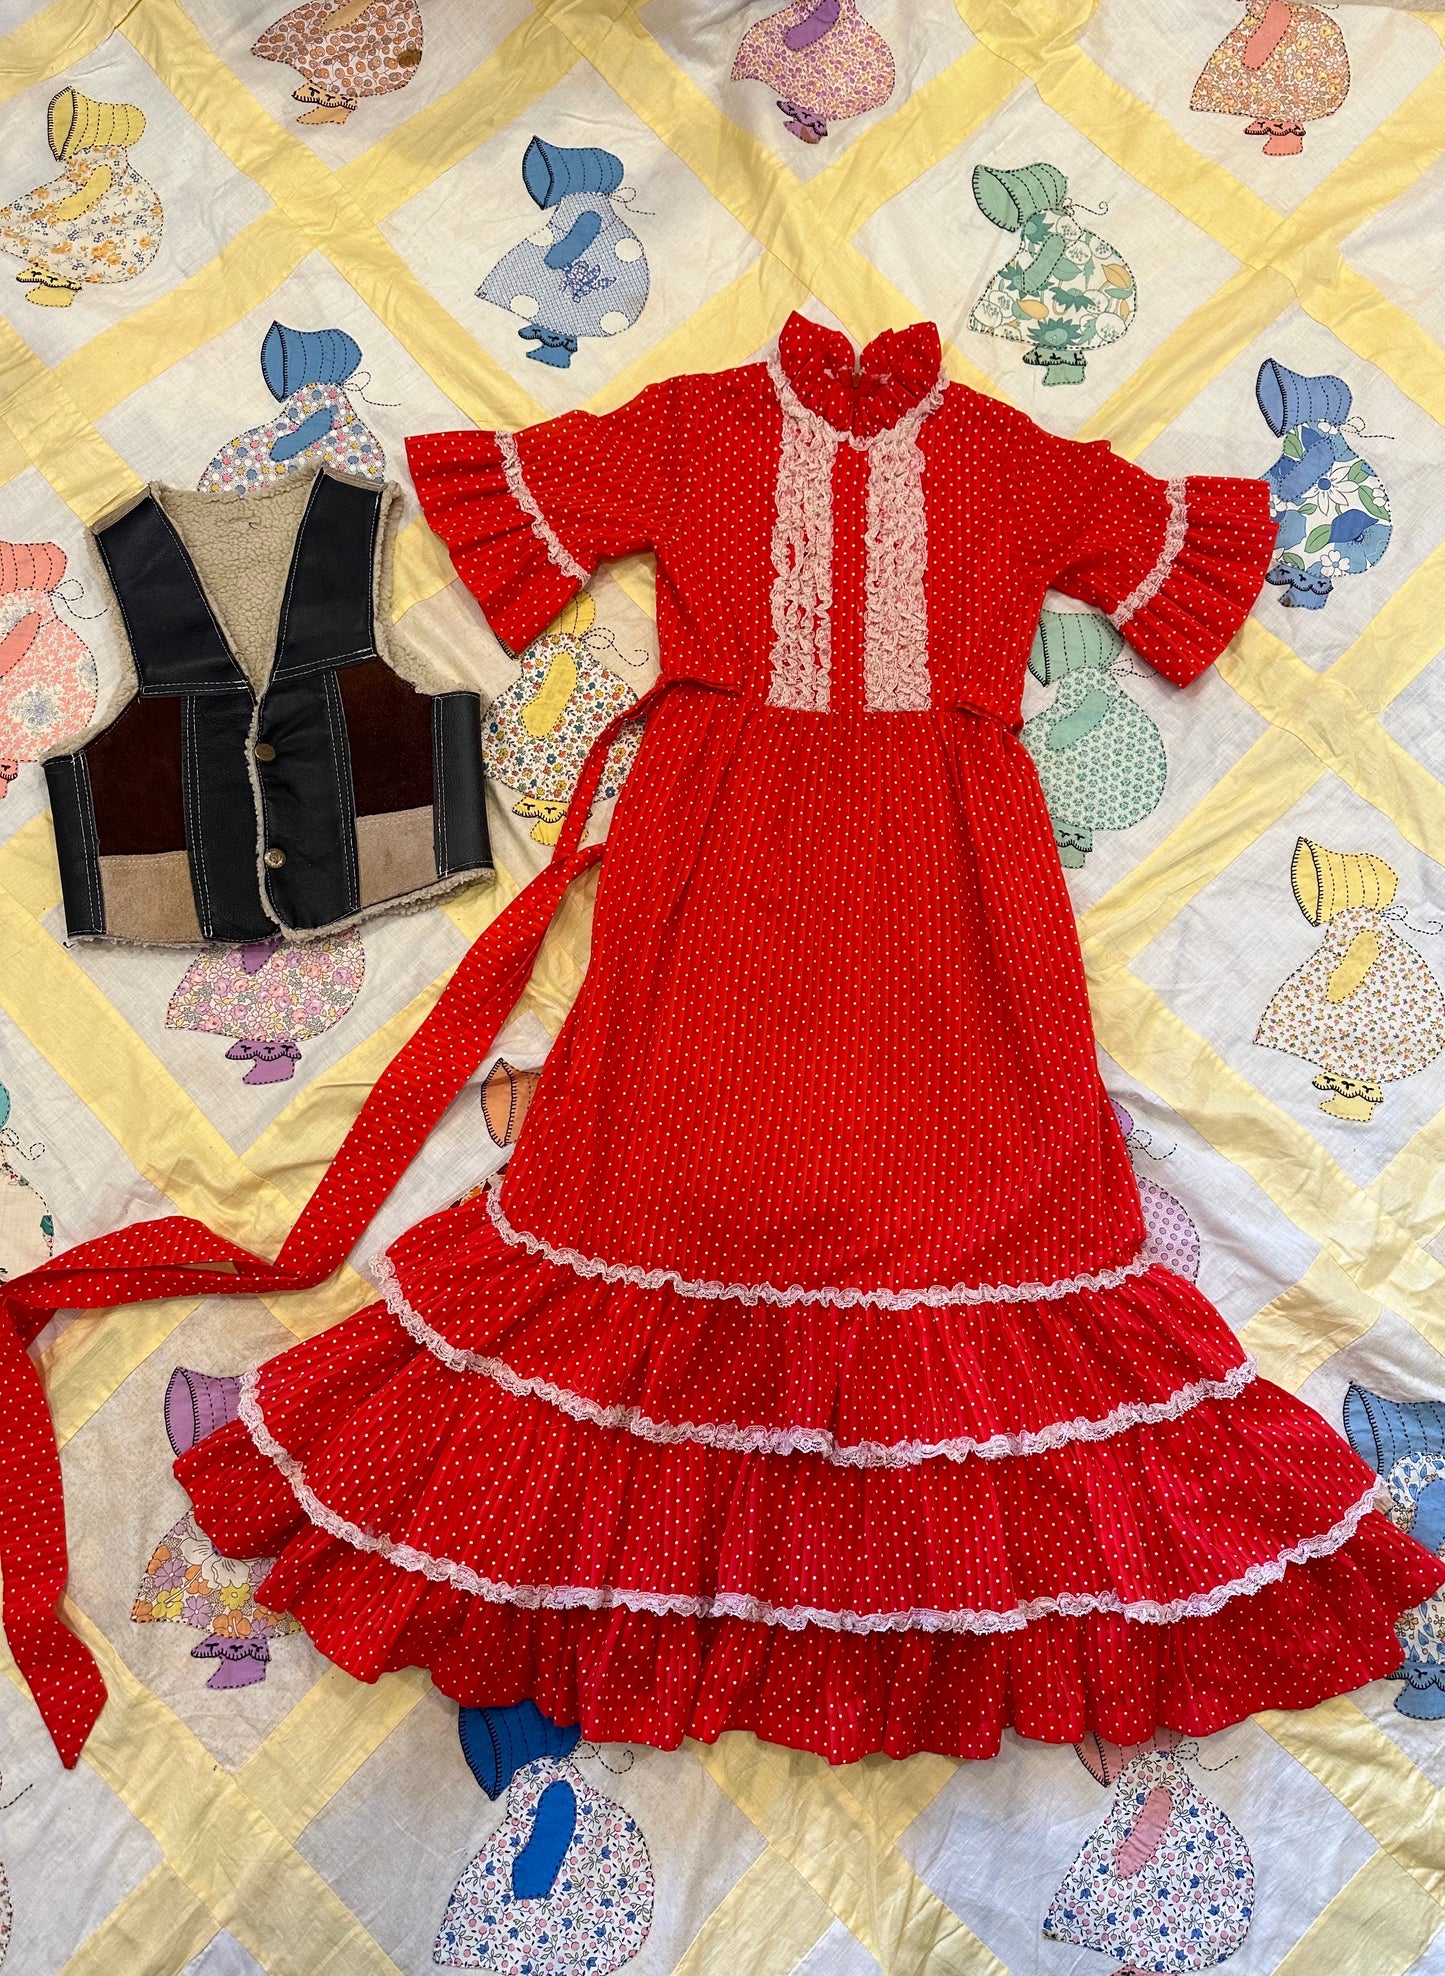 Special Bundle Listing for Eleanor - 1970's Victorian Style Dress / 1970's Prairie Dress in Red / 1970's Suede Patchwork Vest